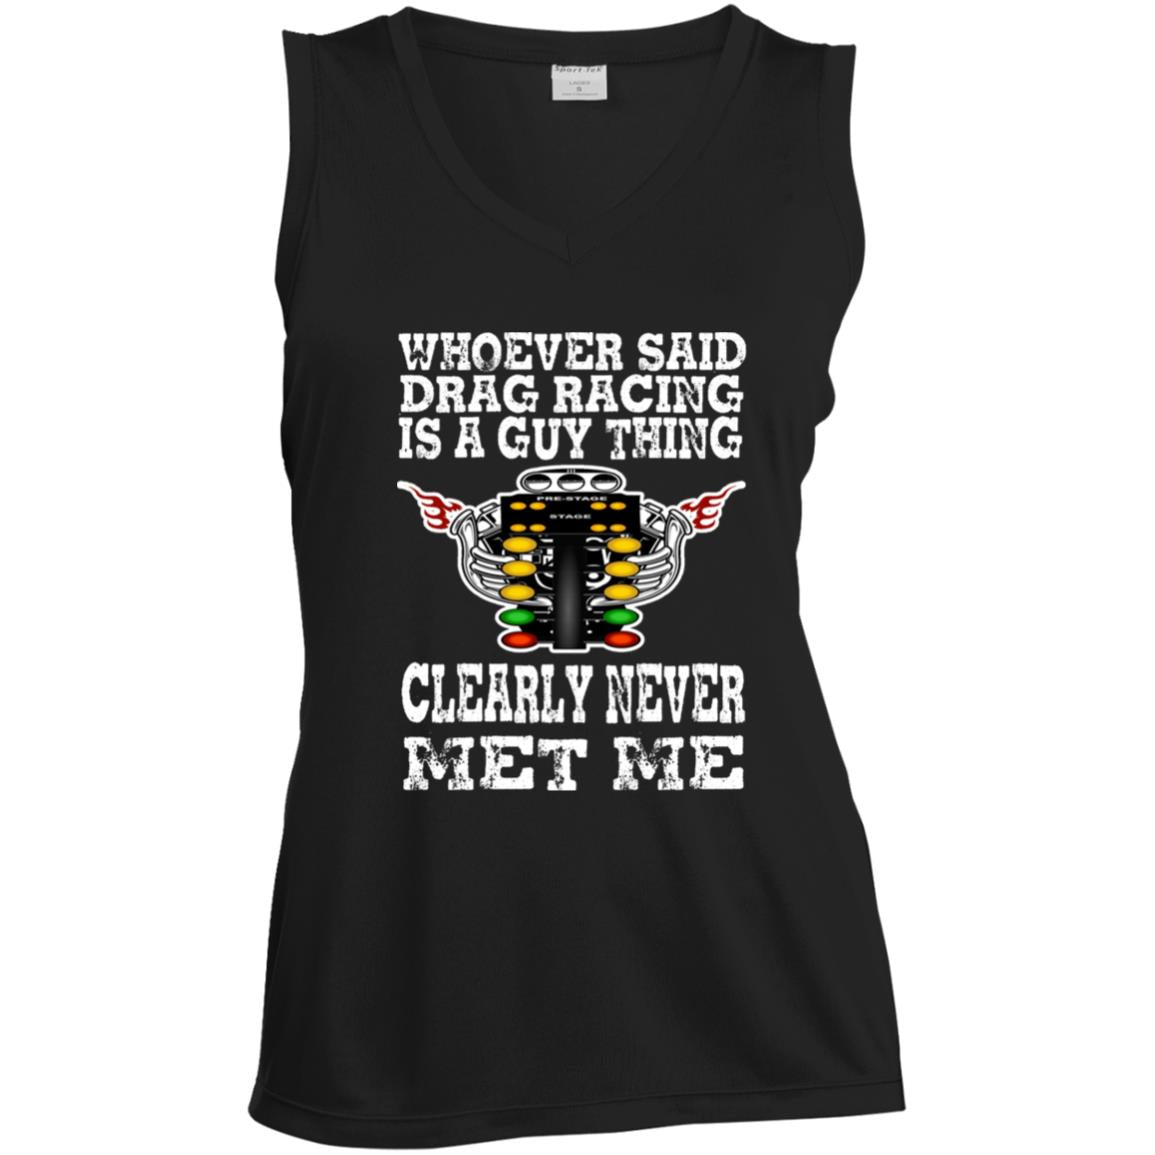 Whoever Said Drag Racing Is A Guy Thing Ladies' Sleeveless V-Neck Performance Tee